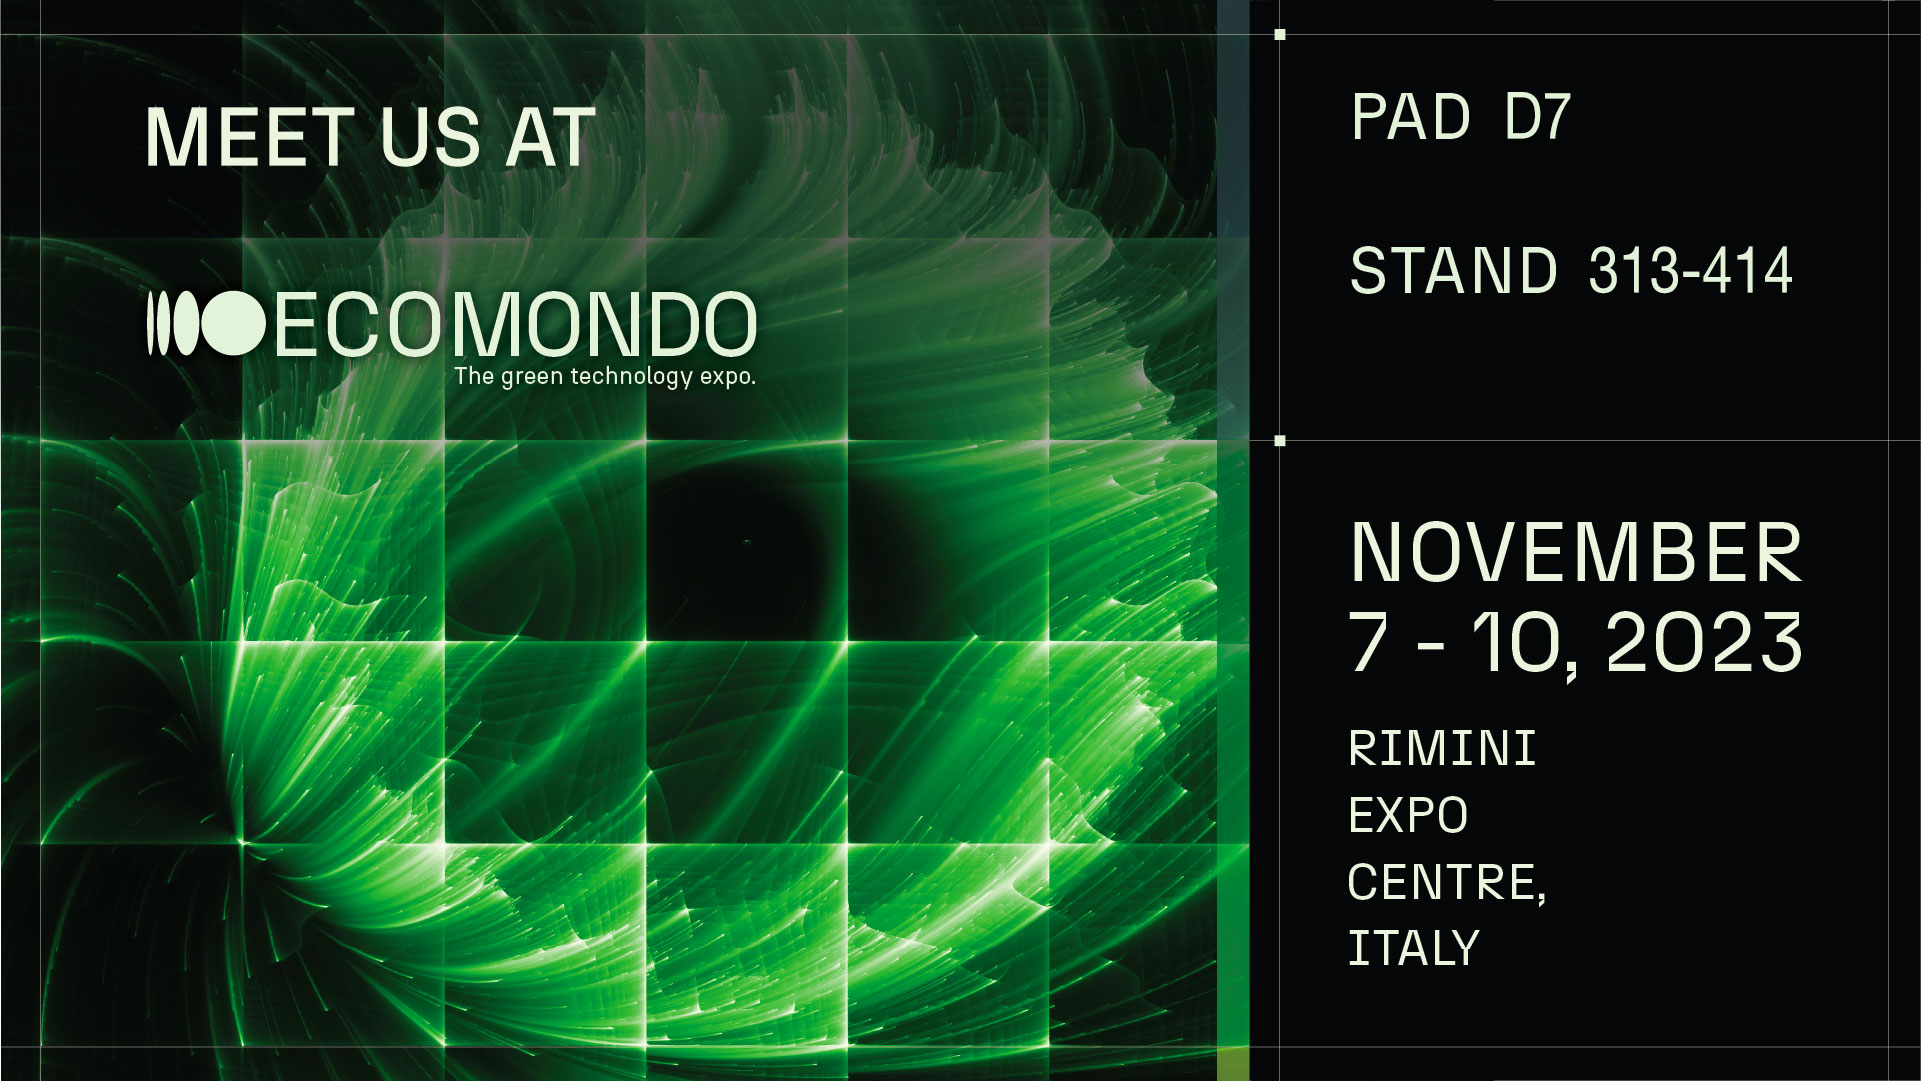 ECO23 MEET US PAD D7 STAND 313-414